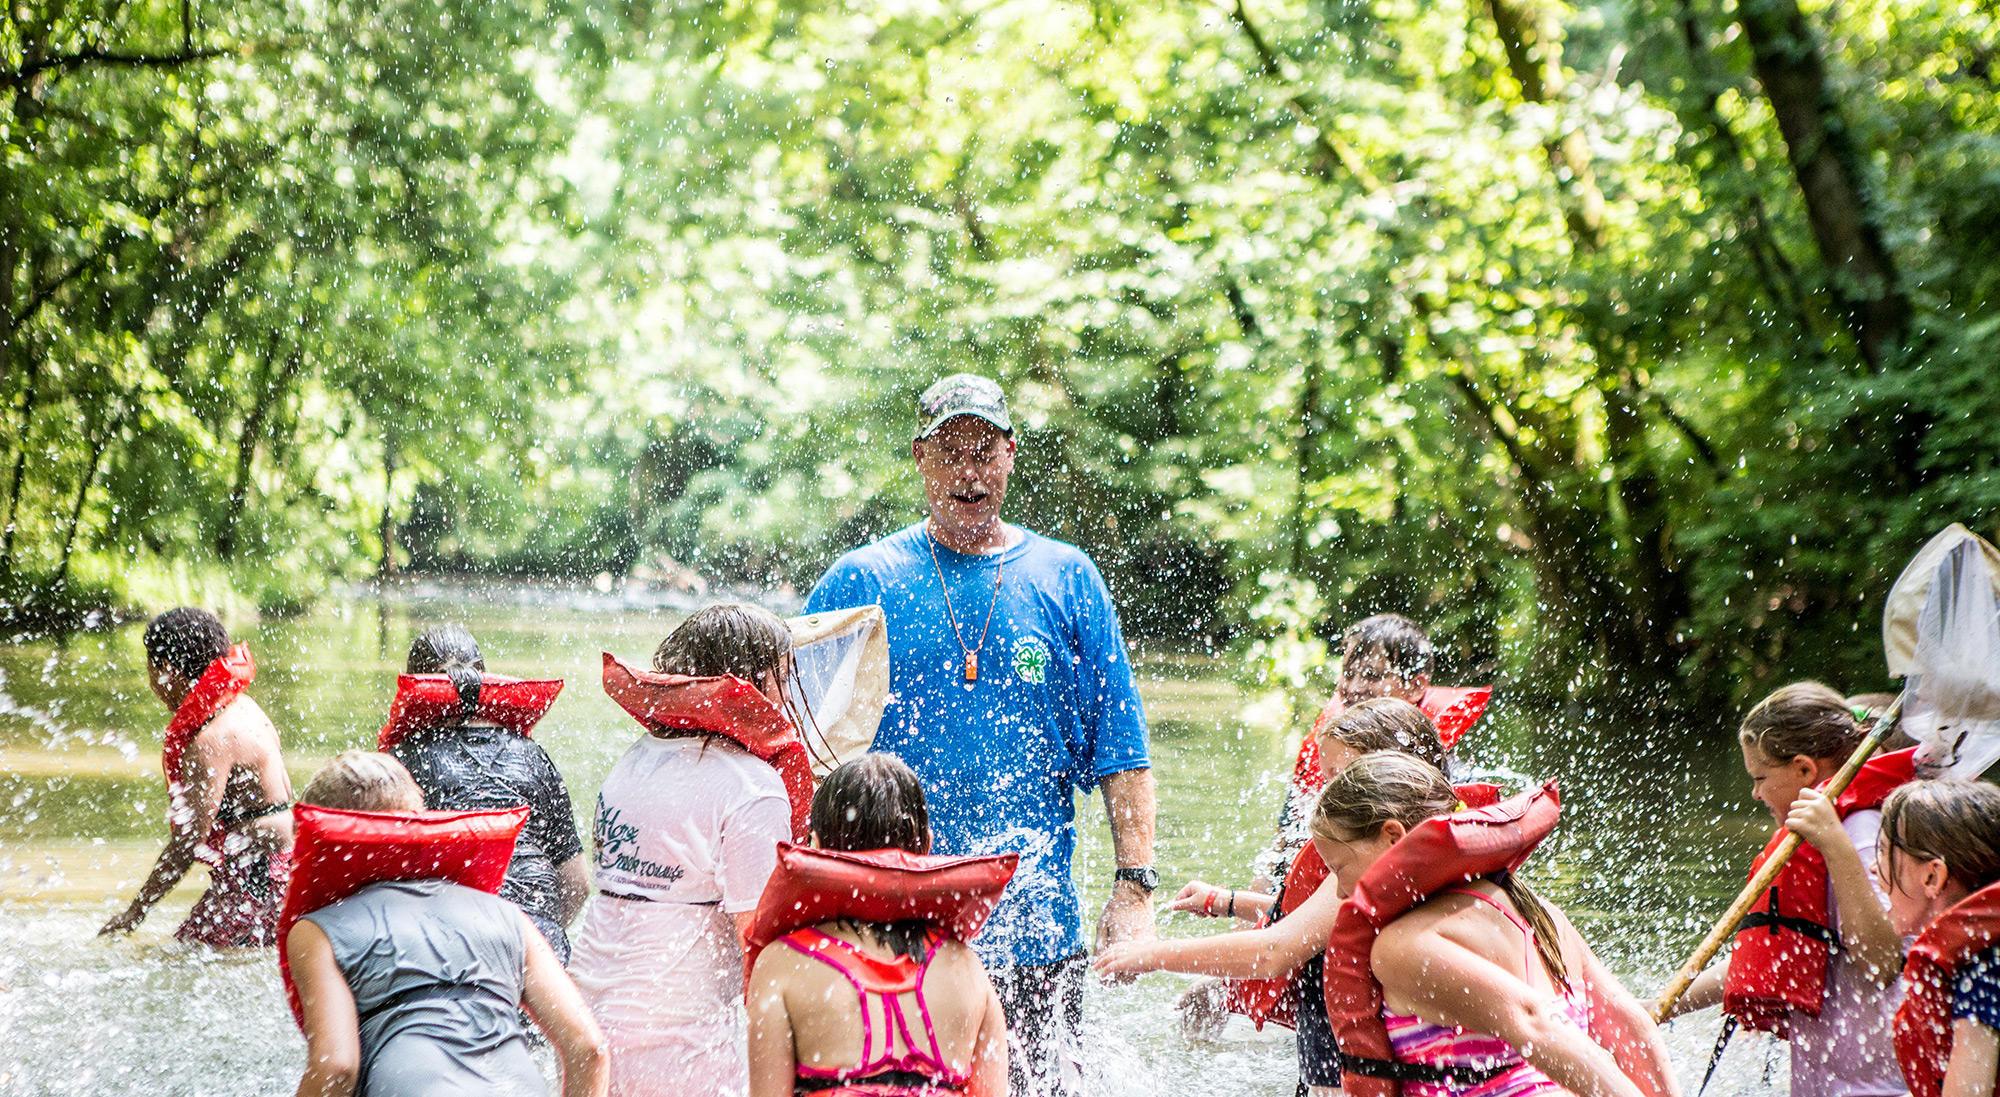 4-H members are playing and learning in the river wearing life preservers—the adult volunteer, also in the river, smiles.